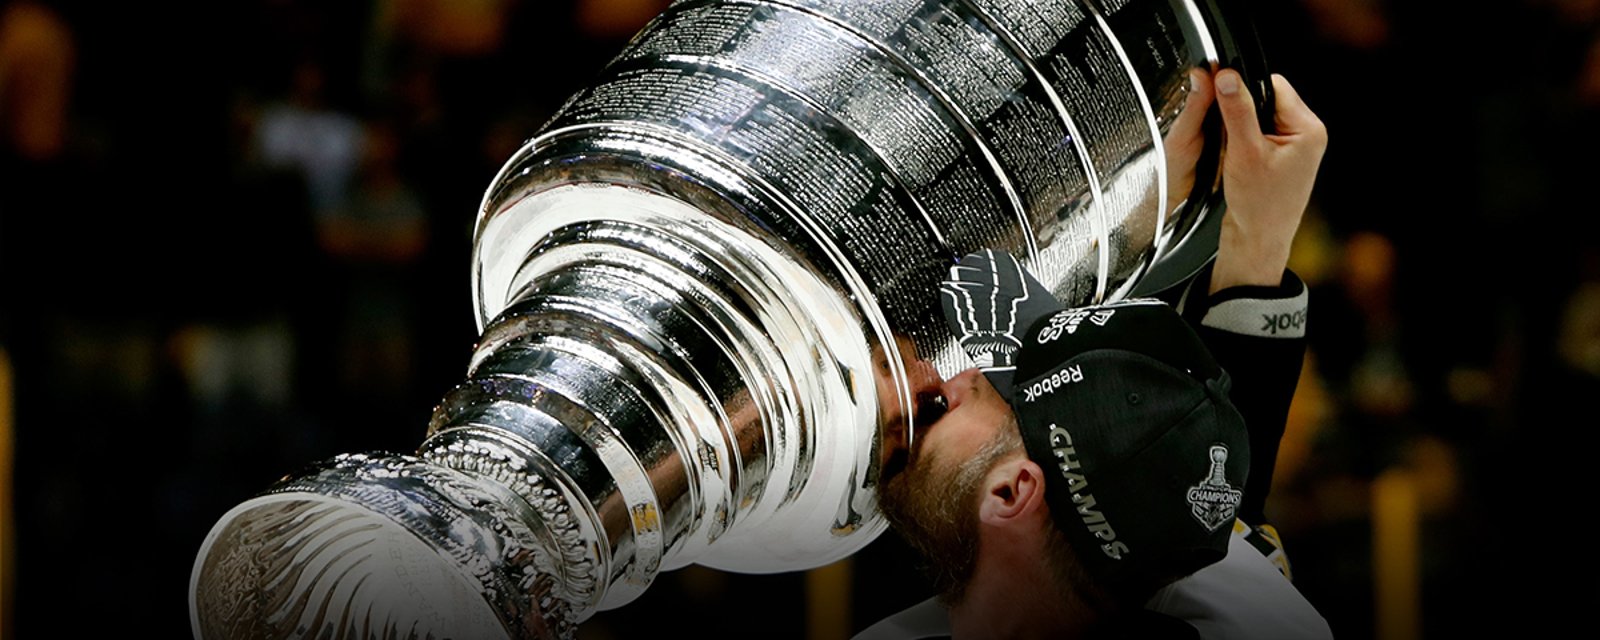 Breaking: Stanley Cup champion of 700+ NHL games announces his retirement